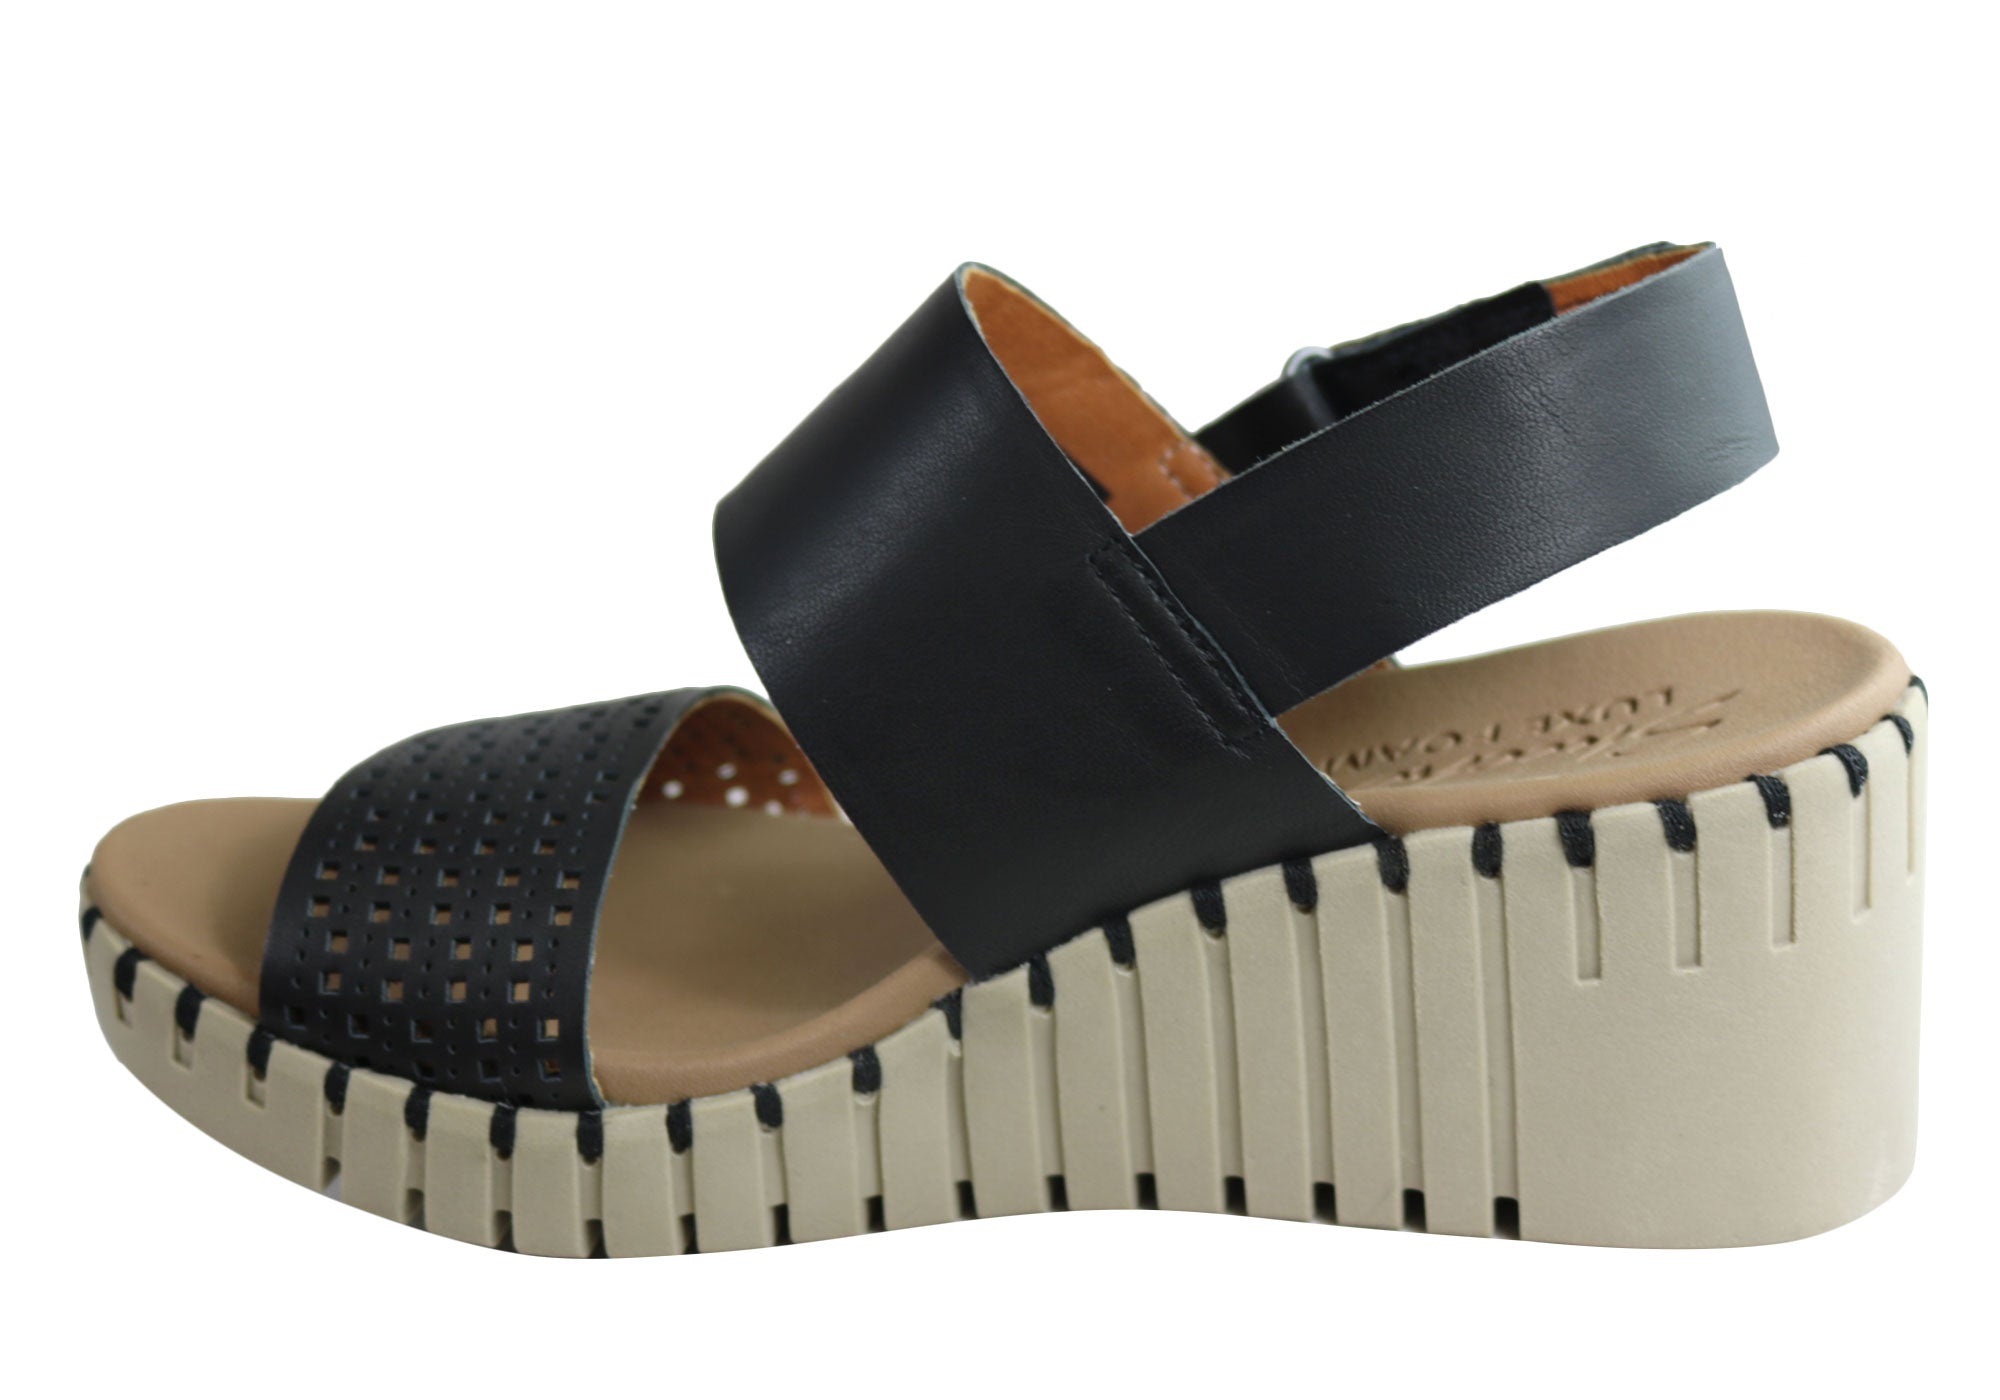 Skechers Womens Pier Ave Comfy Wedge Sandals | Brand House Direct